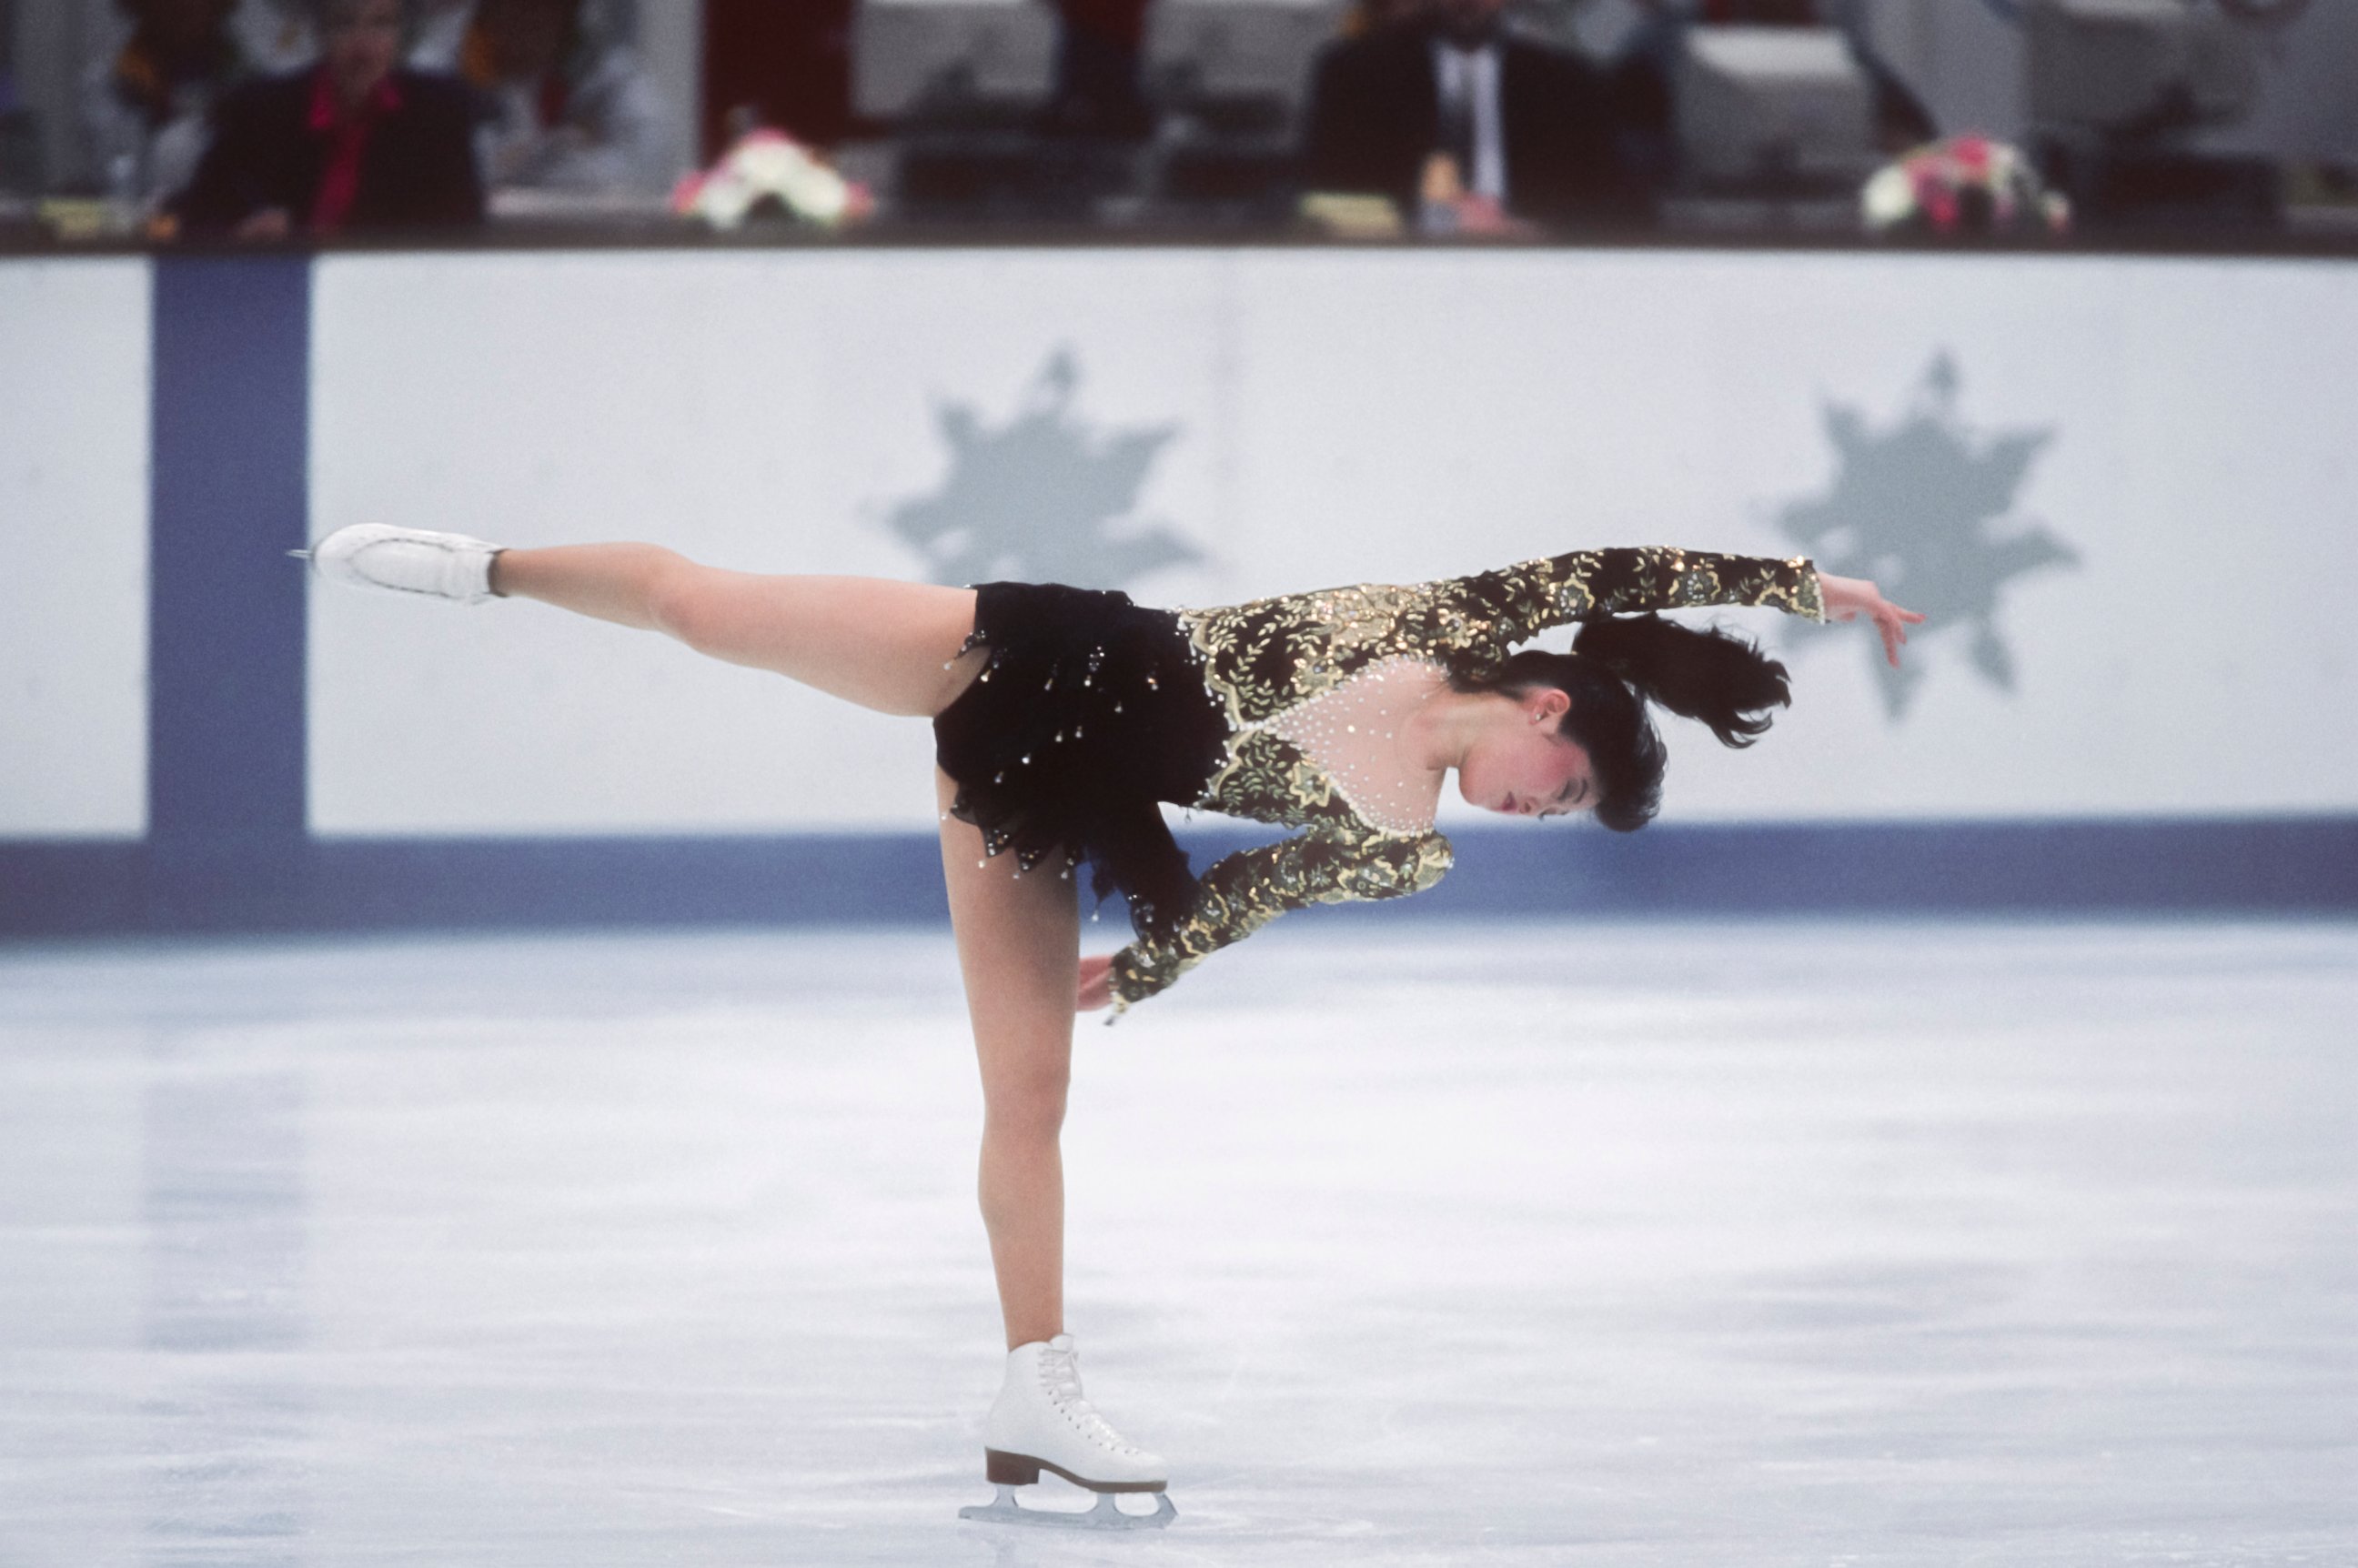 PHOTO: Kristi Yamaguchi competes in the Women's Singles event of the Figure Skating competition of the 1992 Winter Olympic Games held in Albertville, France on Feb. 21, 1992.